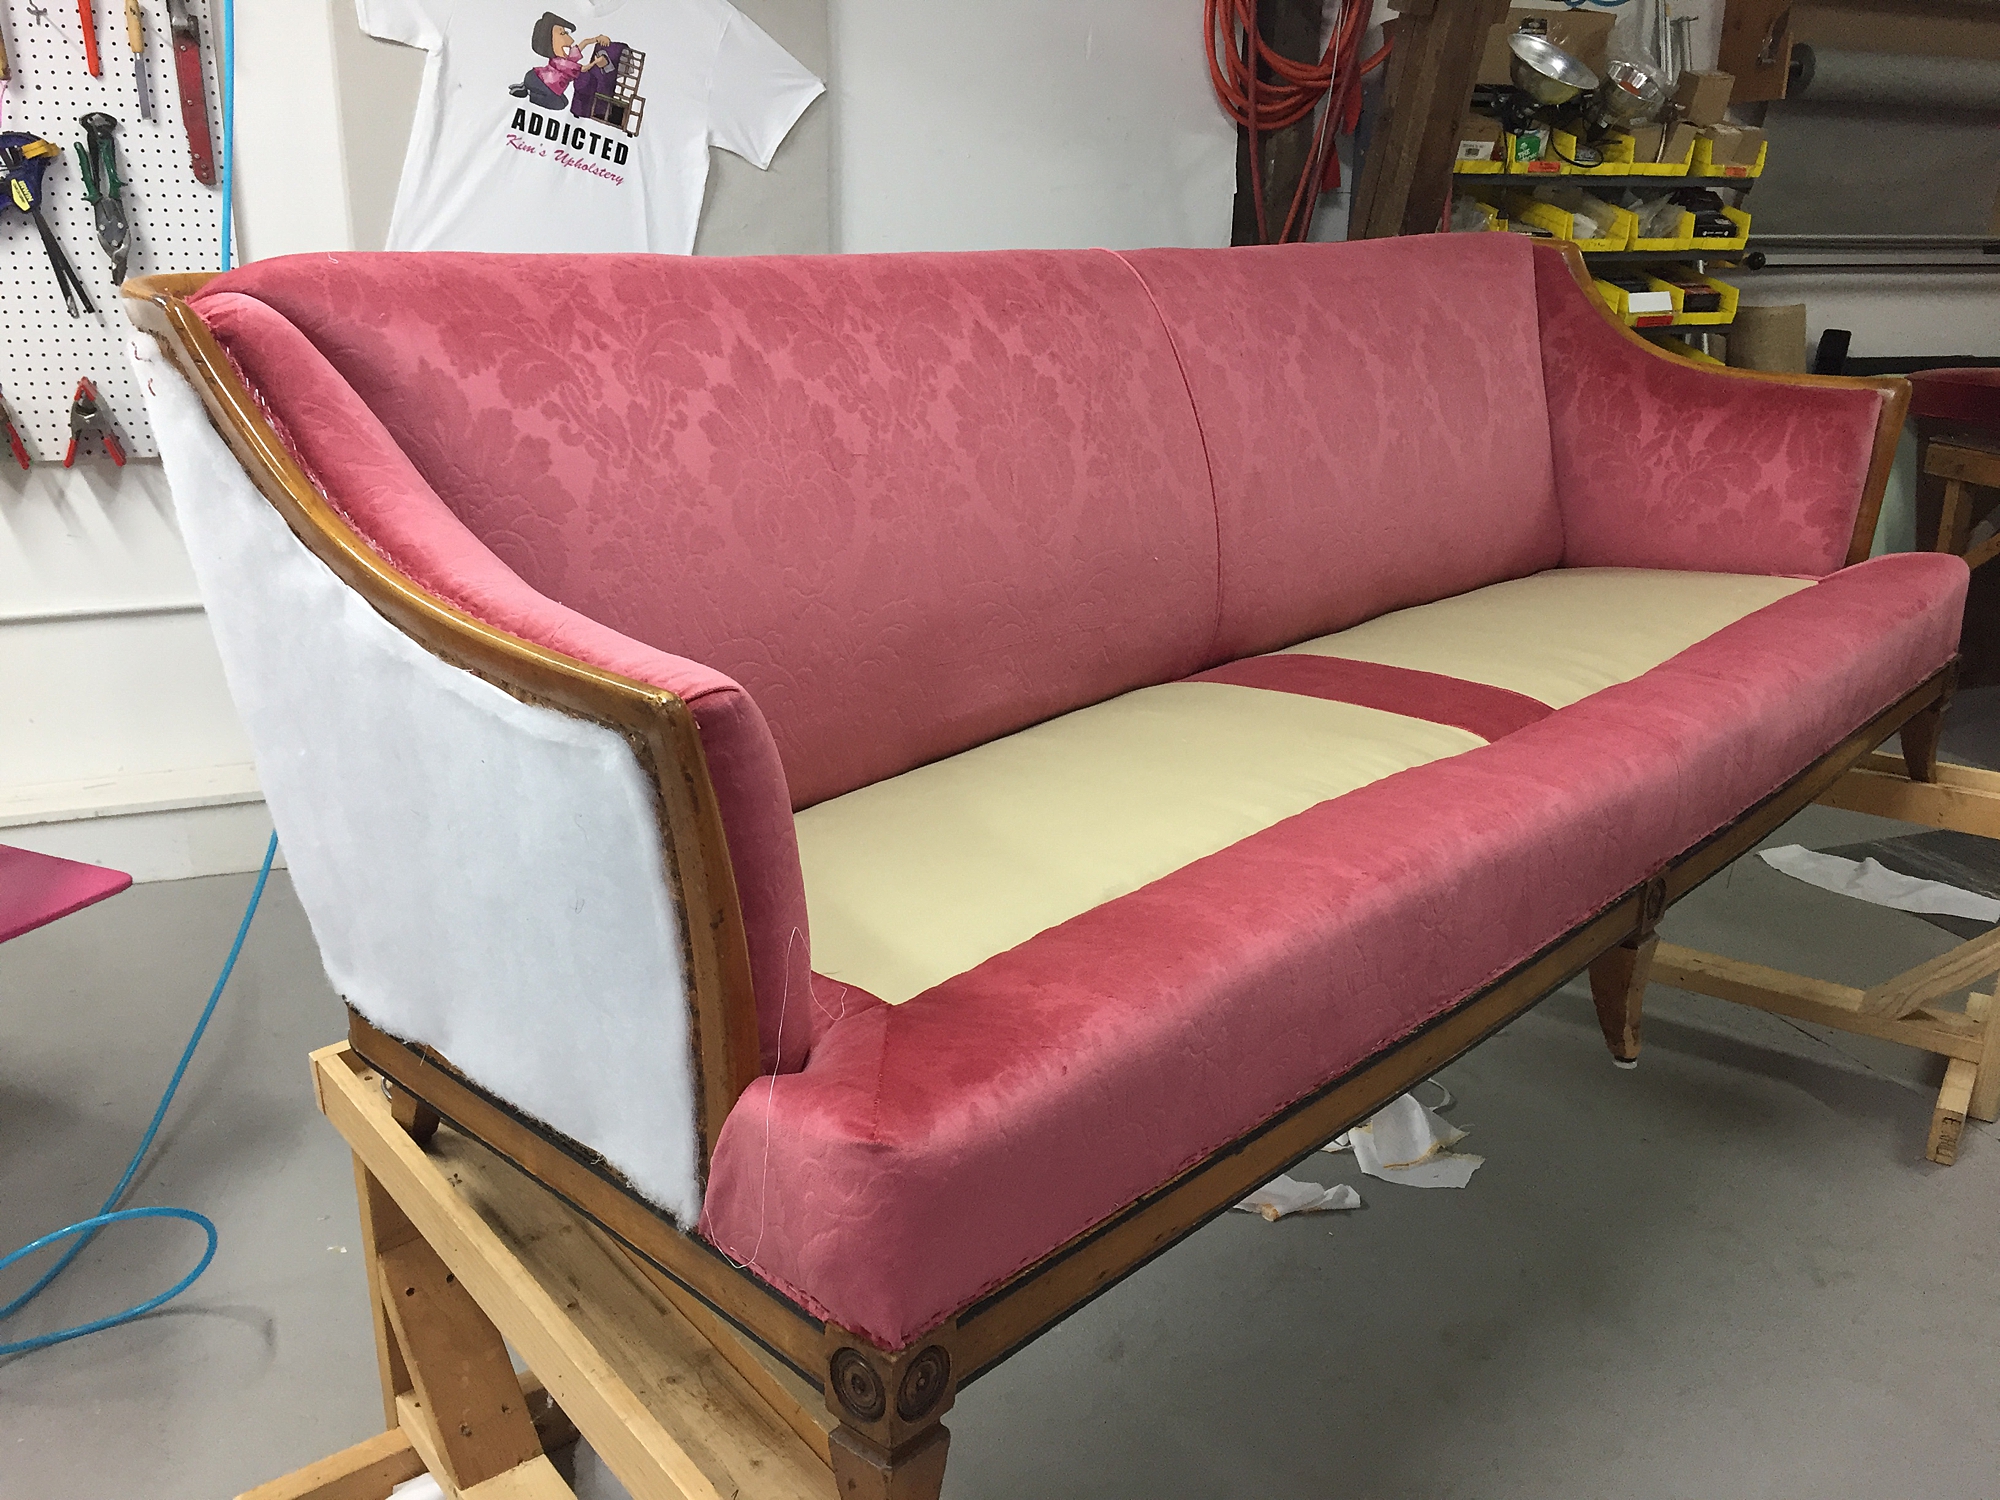 learning how to reupholster a couch